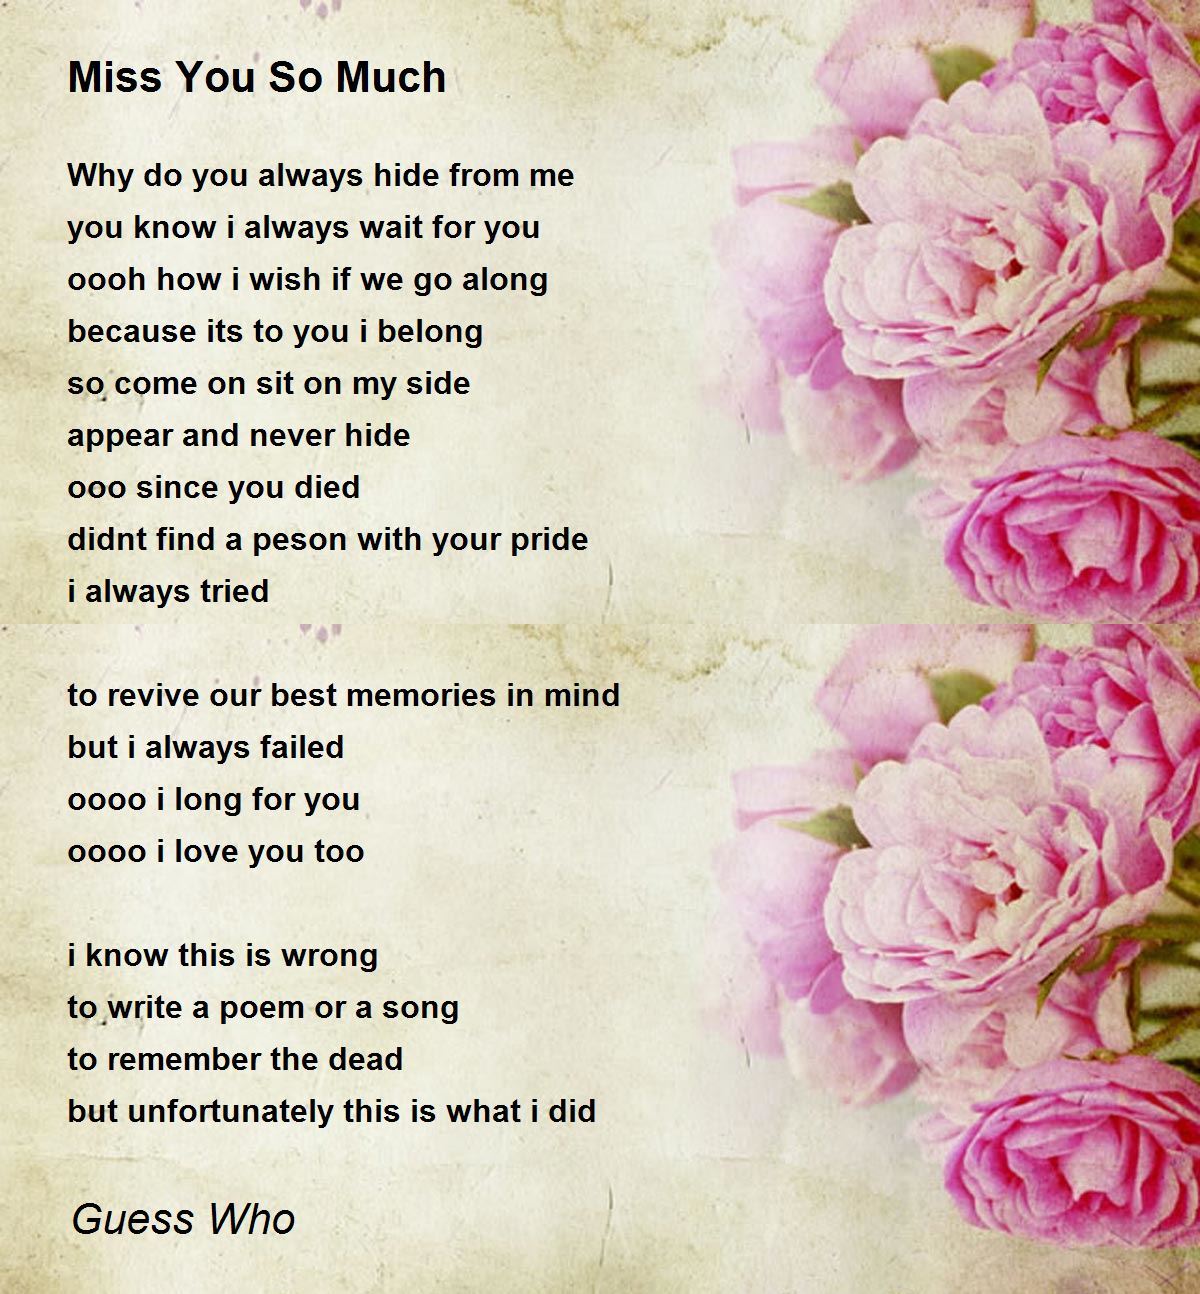 Miss You So Much - Miss You So Much Poem by Guess Who